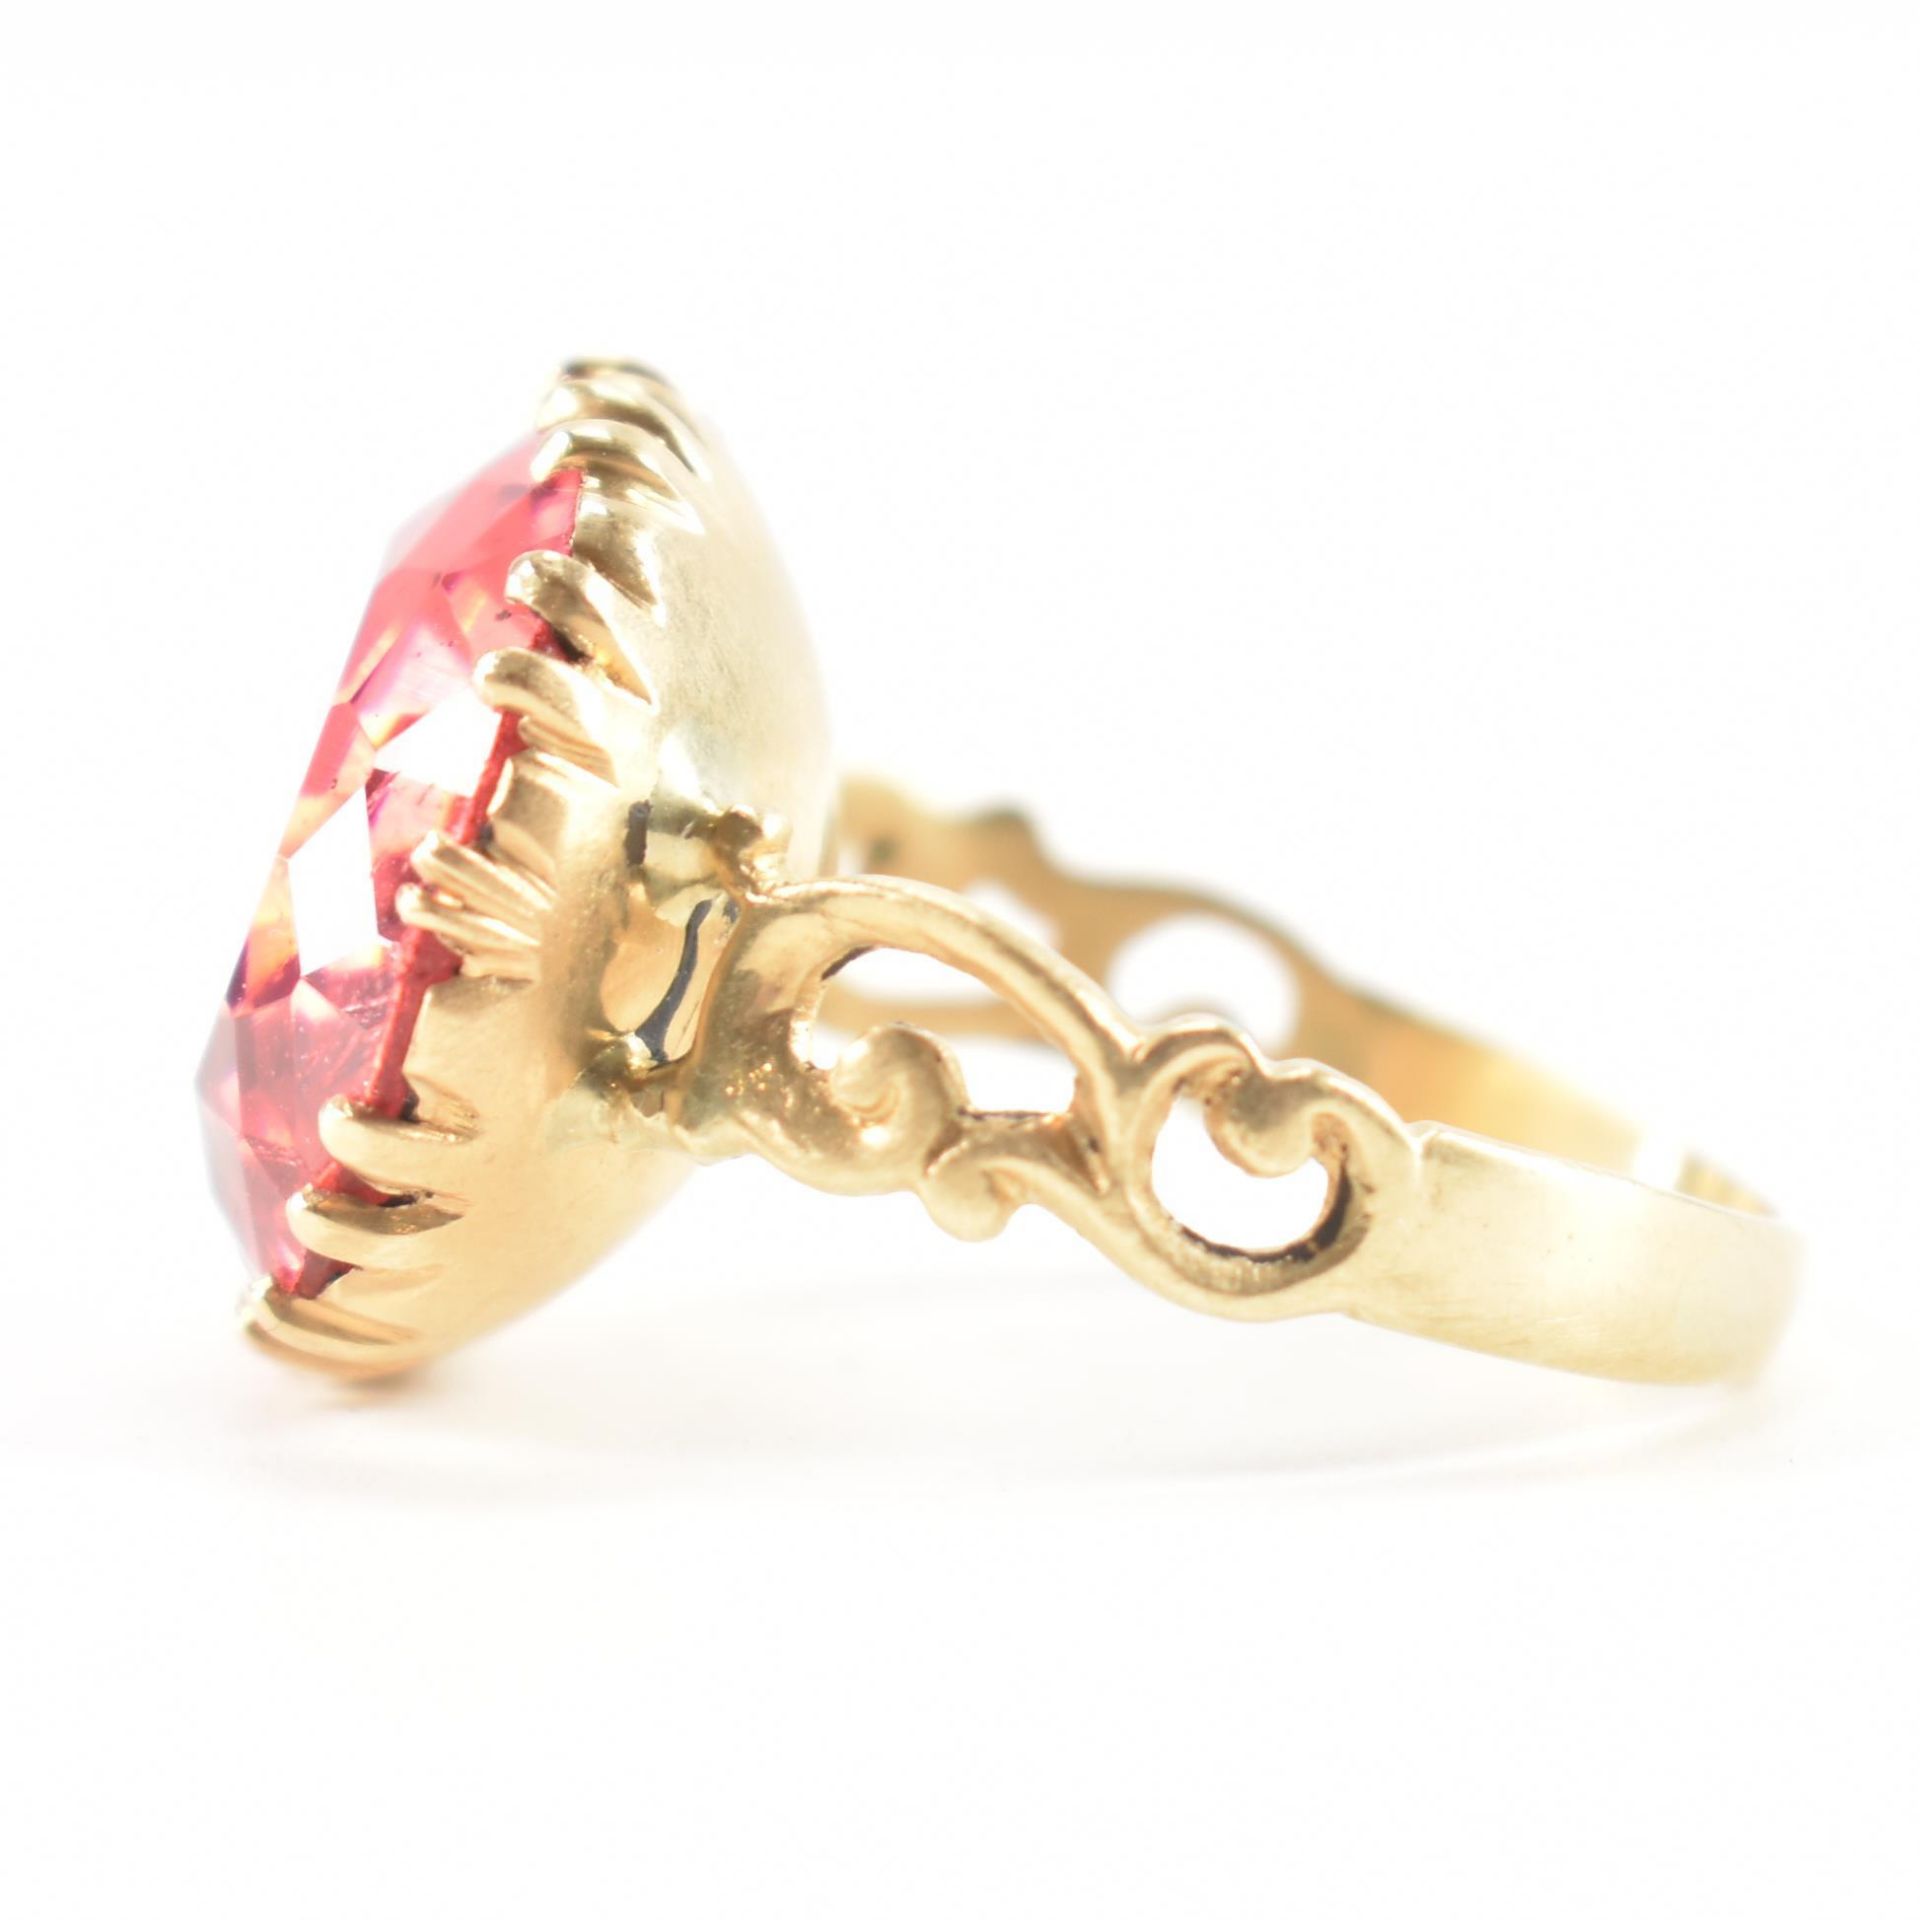 ANTIQUE GOLD & RED PINK PASTE STONE DRESS RING - Image 2 of 8